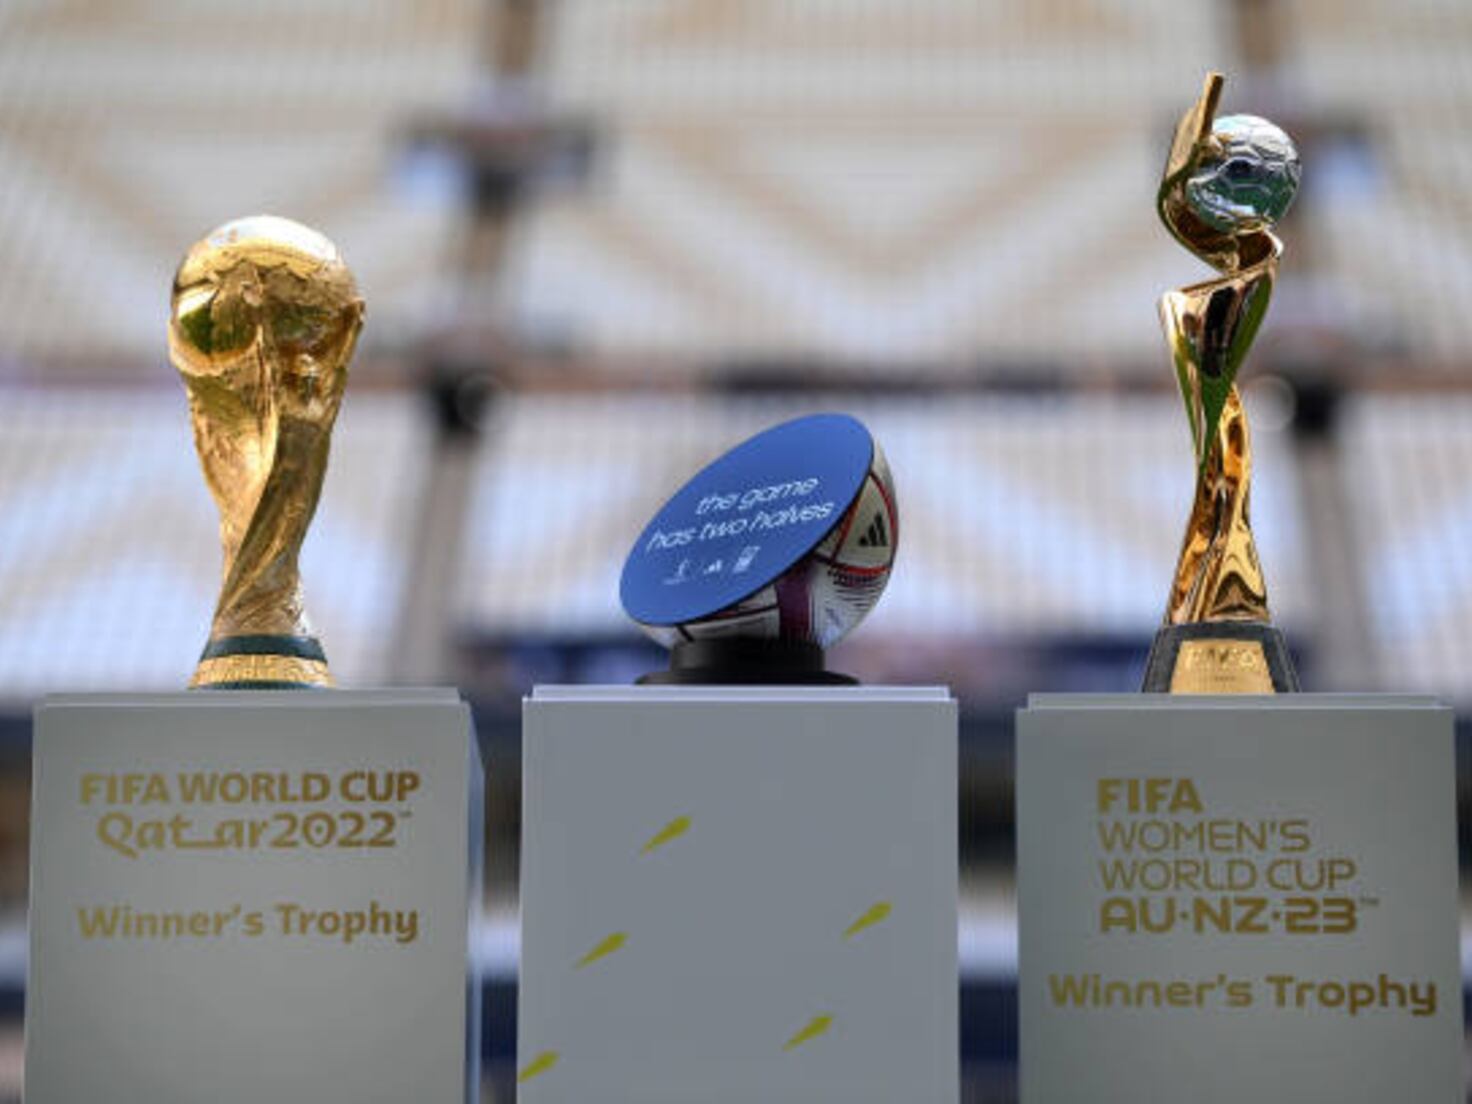 Chart: How Much Prize Money Do World Cup Champions Win?